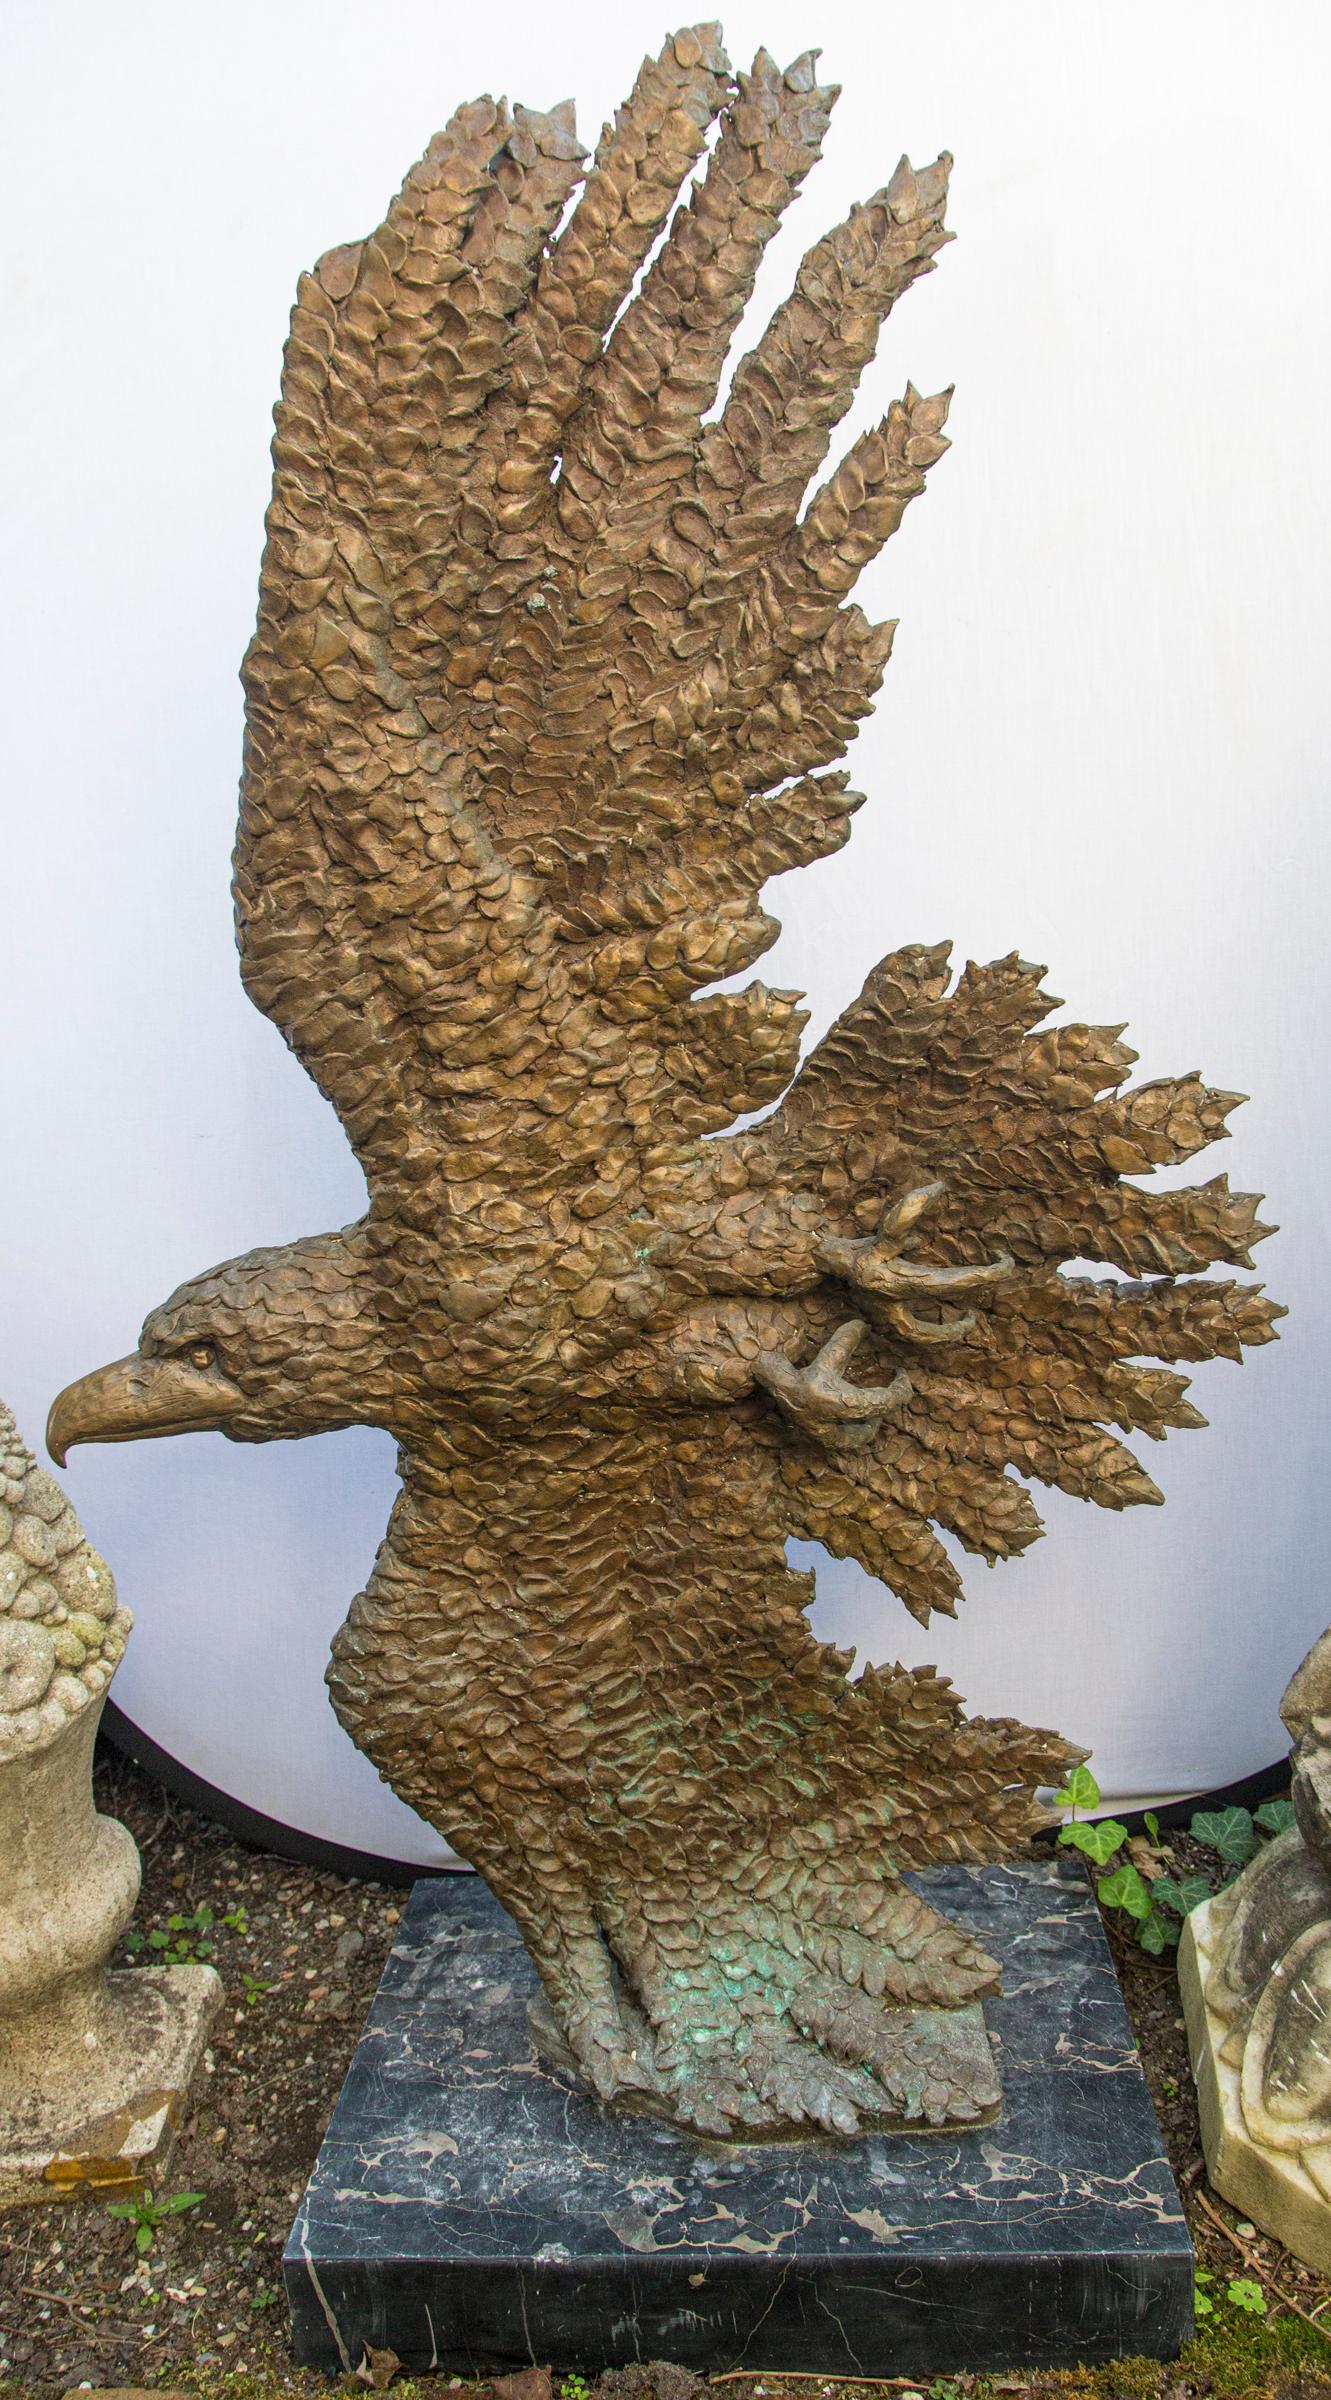 Mounted on a black and beige veined marble base, measuring 24 inches wide, 16 inches deep and 4 inches tall. The overall height is therefore 57 inches.
Golden color with some vertigris appearing, as shown. Each bronze feather separately placed by